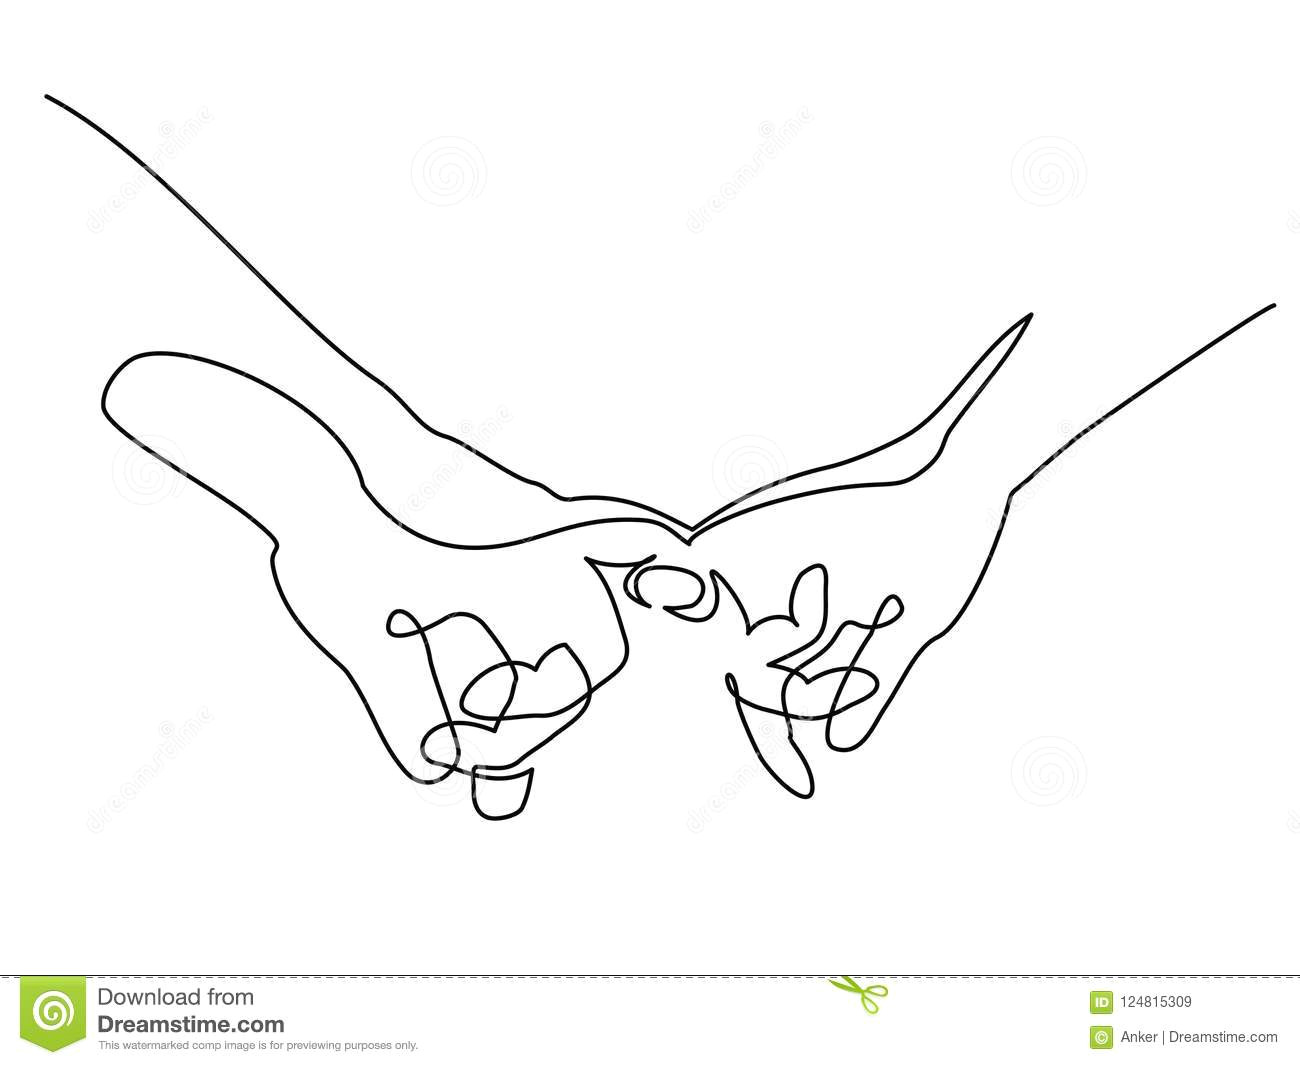 Drawings Of Hands Holding A Heart Hands Woman and Man Holding together with Fingers Stock Vector